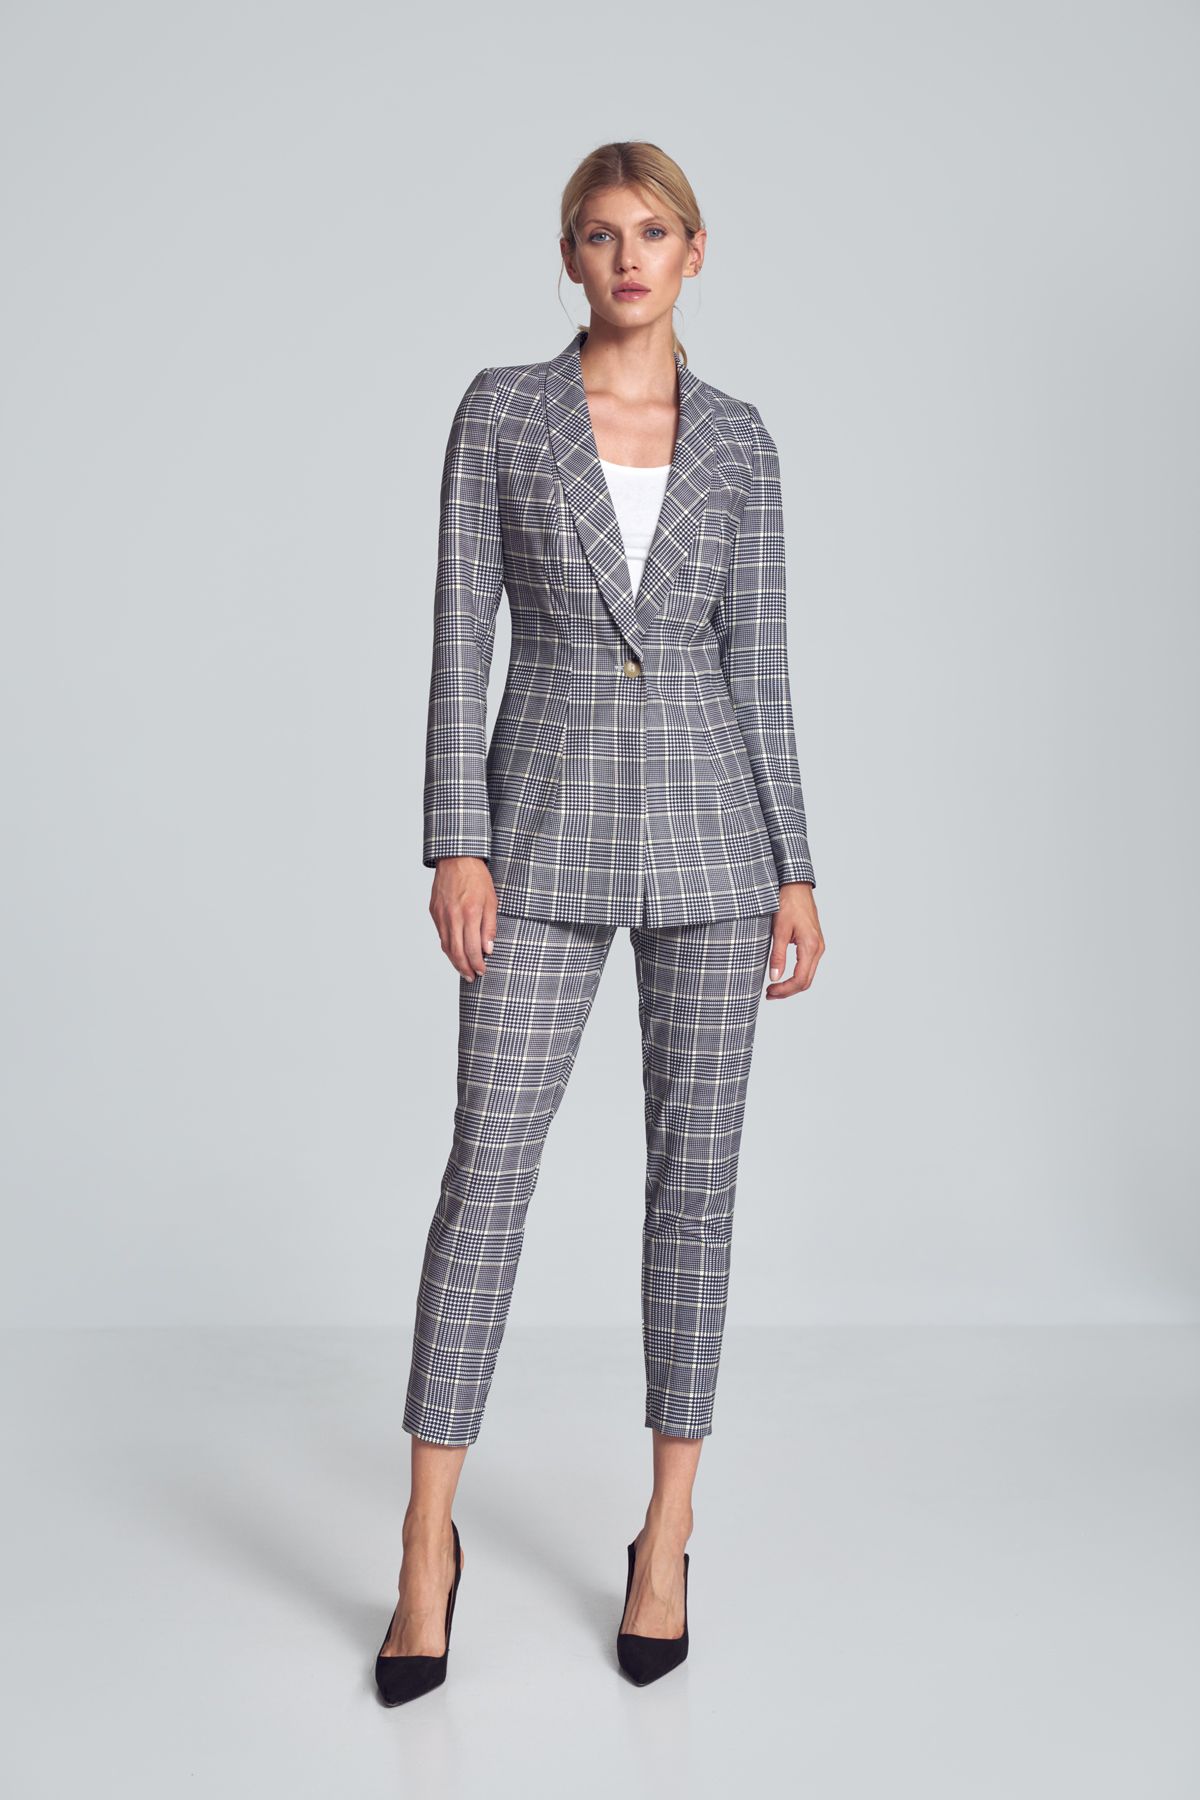 Jacket with a shawl collar in a houndstooth , slightly fitted at the waist, fastened with a single button at the front, with a lining, jacket covering the hips. No pockets.